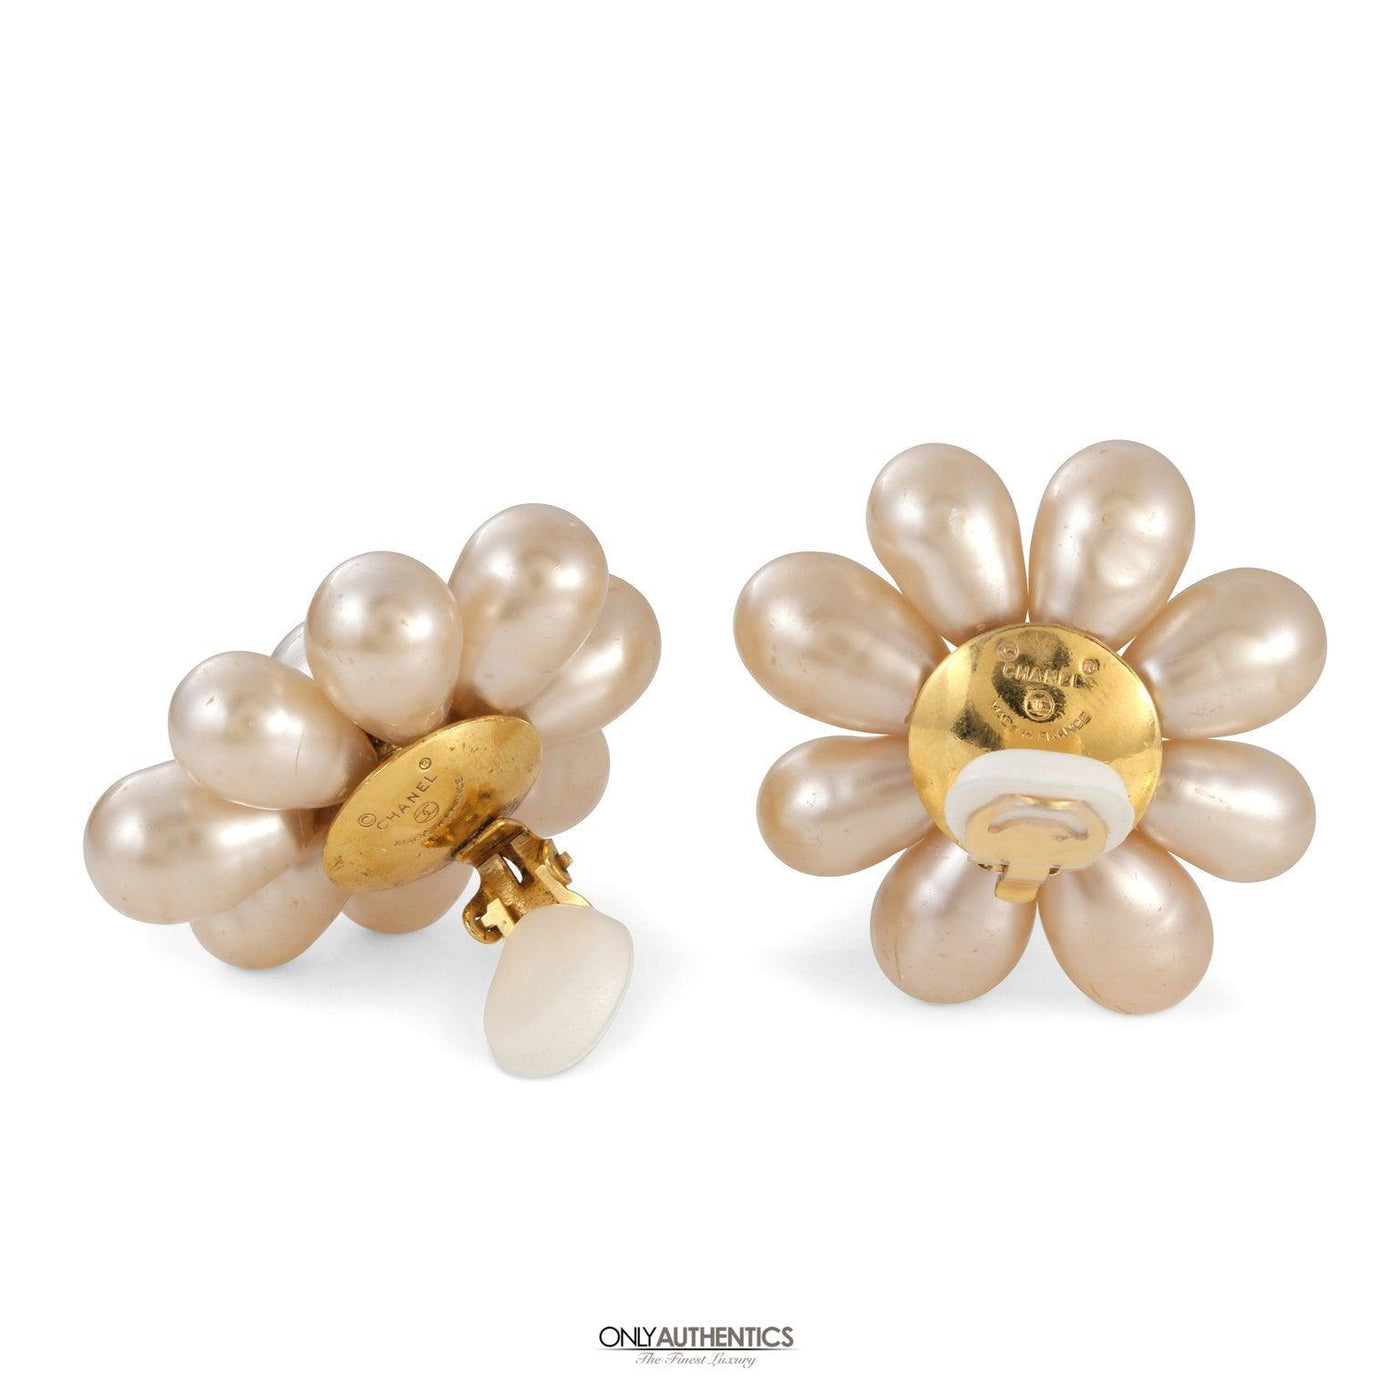 Chanel Pearl Flower Earrings - Only Authentics